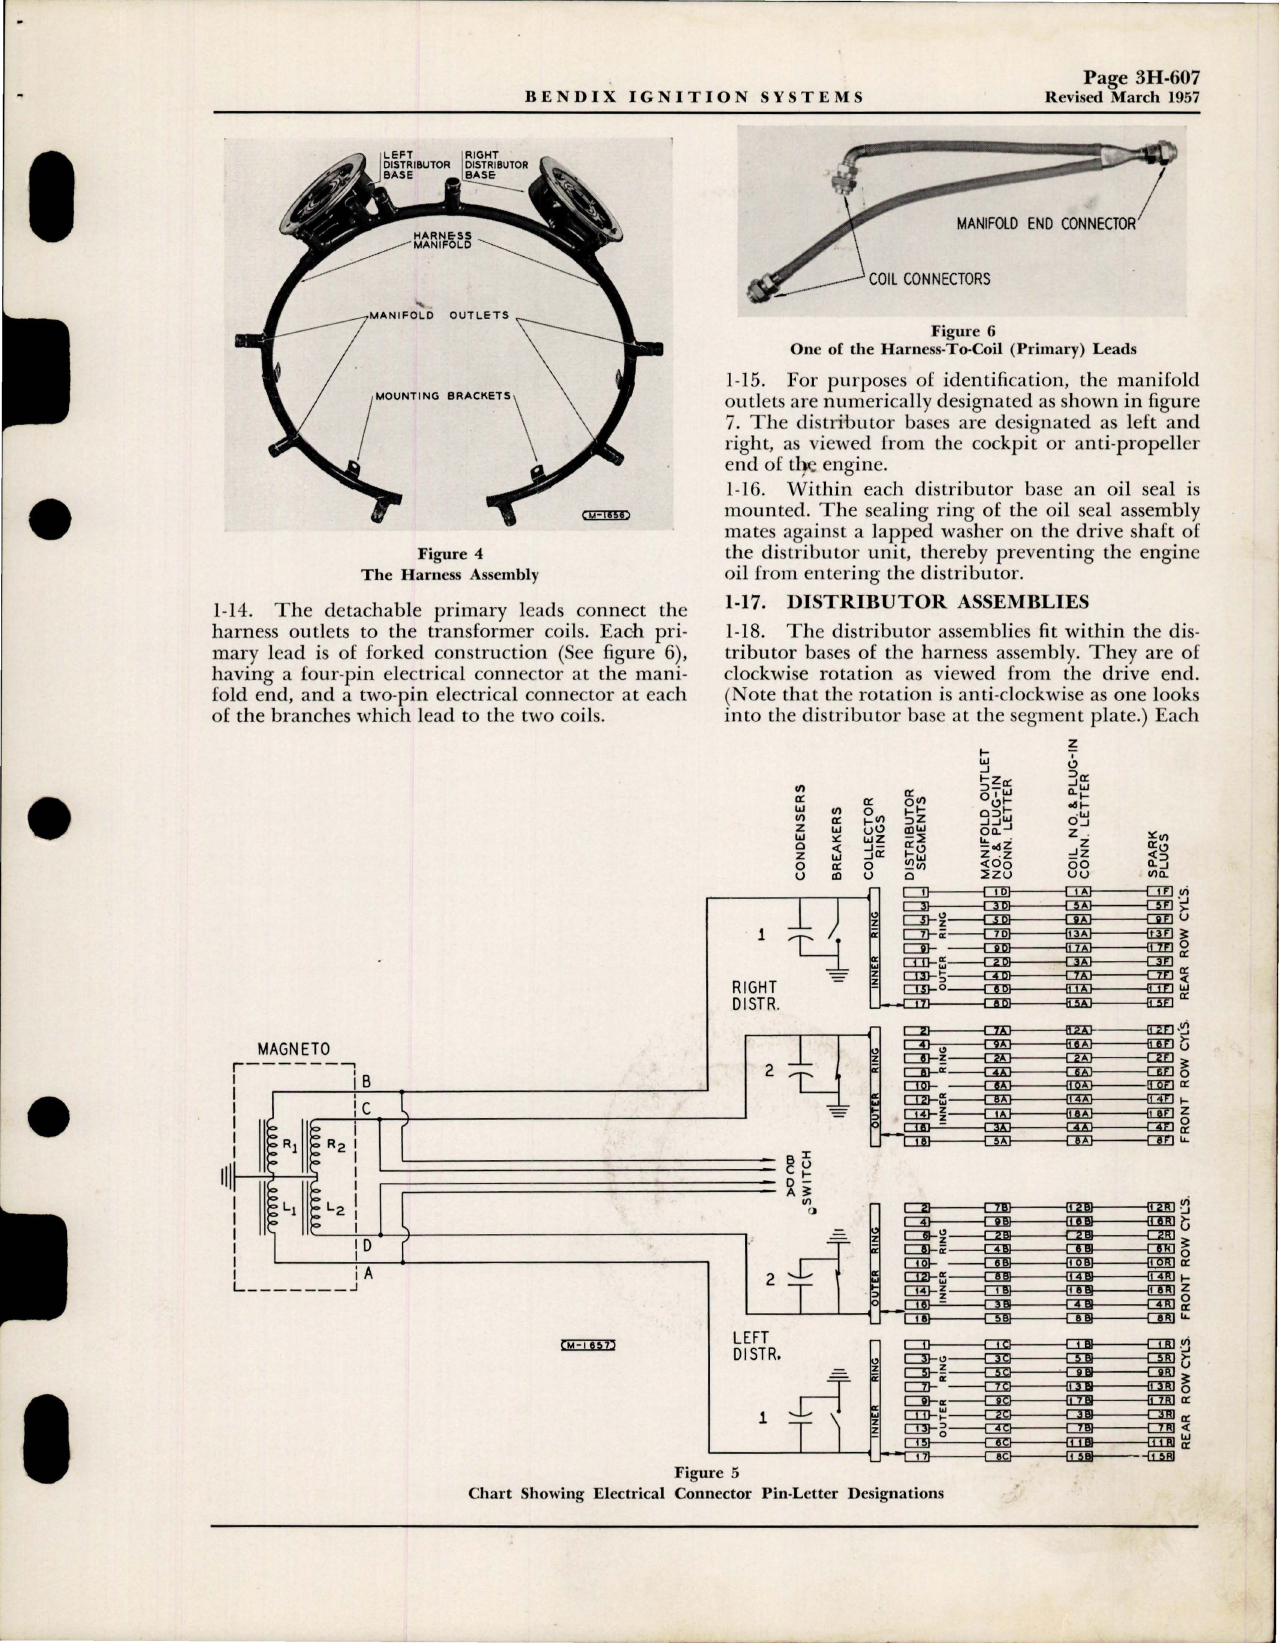 Sample page 7 from AirCorps Library document: Overhaul Instructions for Bendix Low Tension High Altitude Ignition System